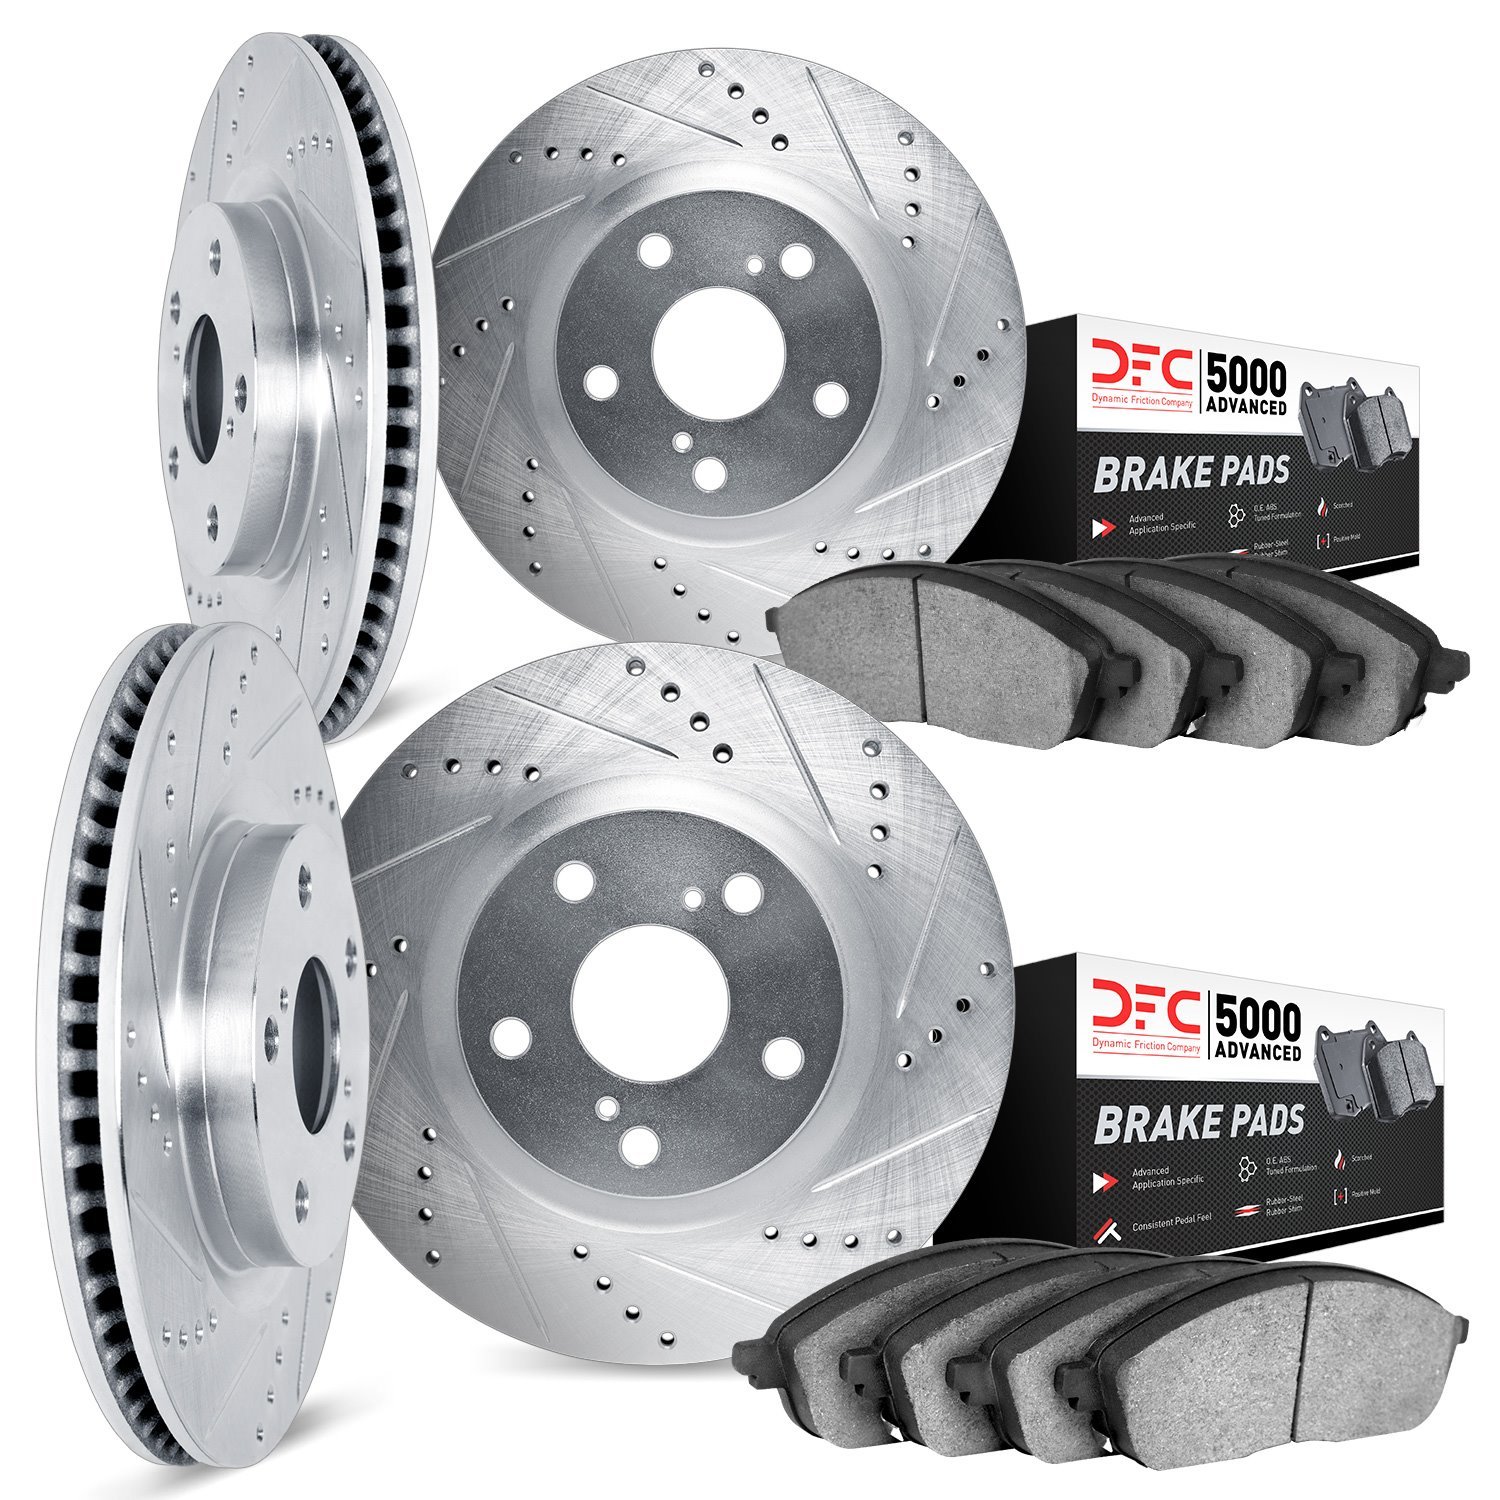 7504-42055 Drilled/Slotted Brake Rotors w/5000 Advanced Brake Pads Kit [Silver], Fits Select Mopar, Position: Front and Rear